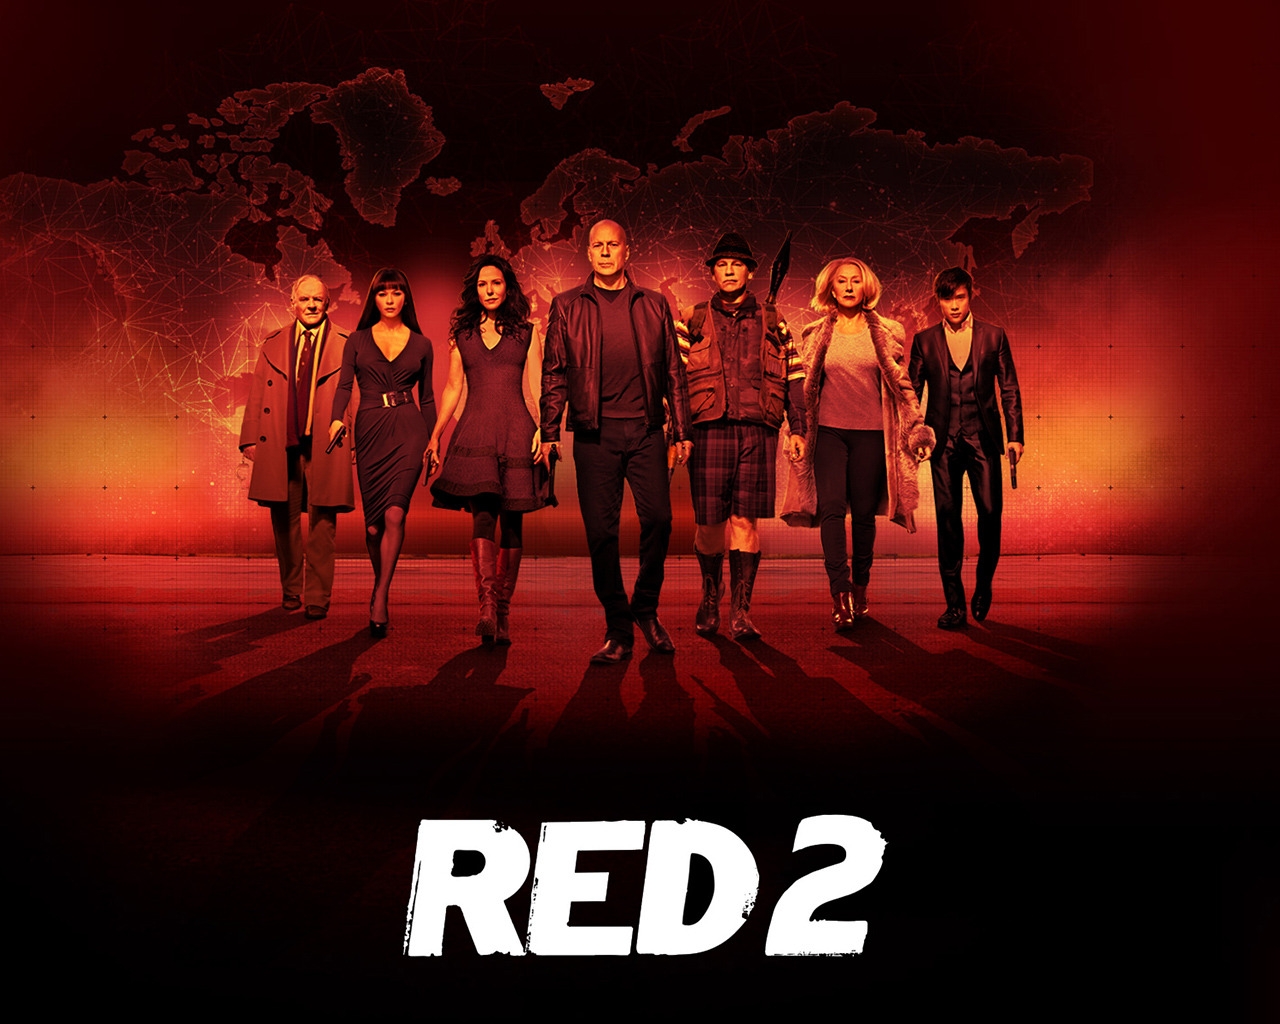 Red 2 Movie for 1280 x 1024 resolution